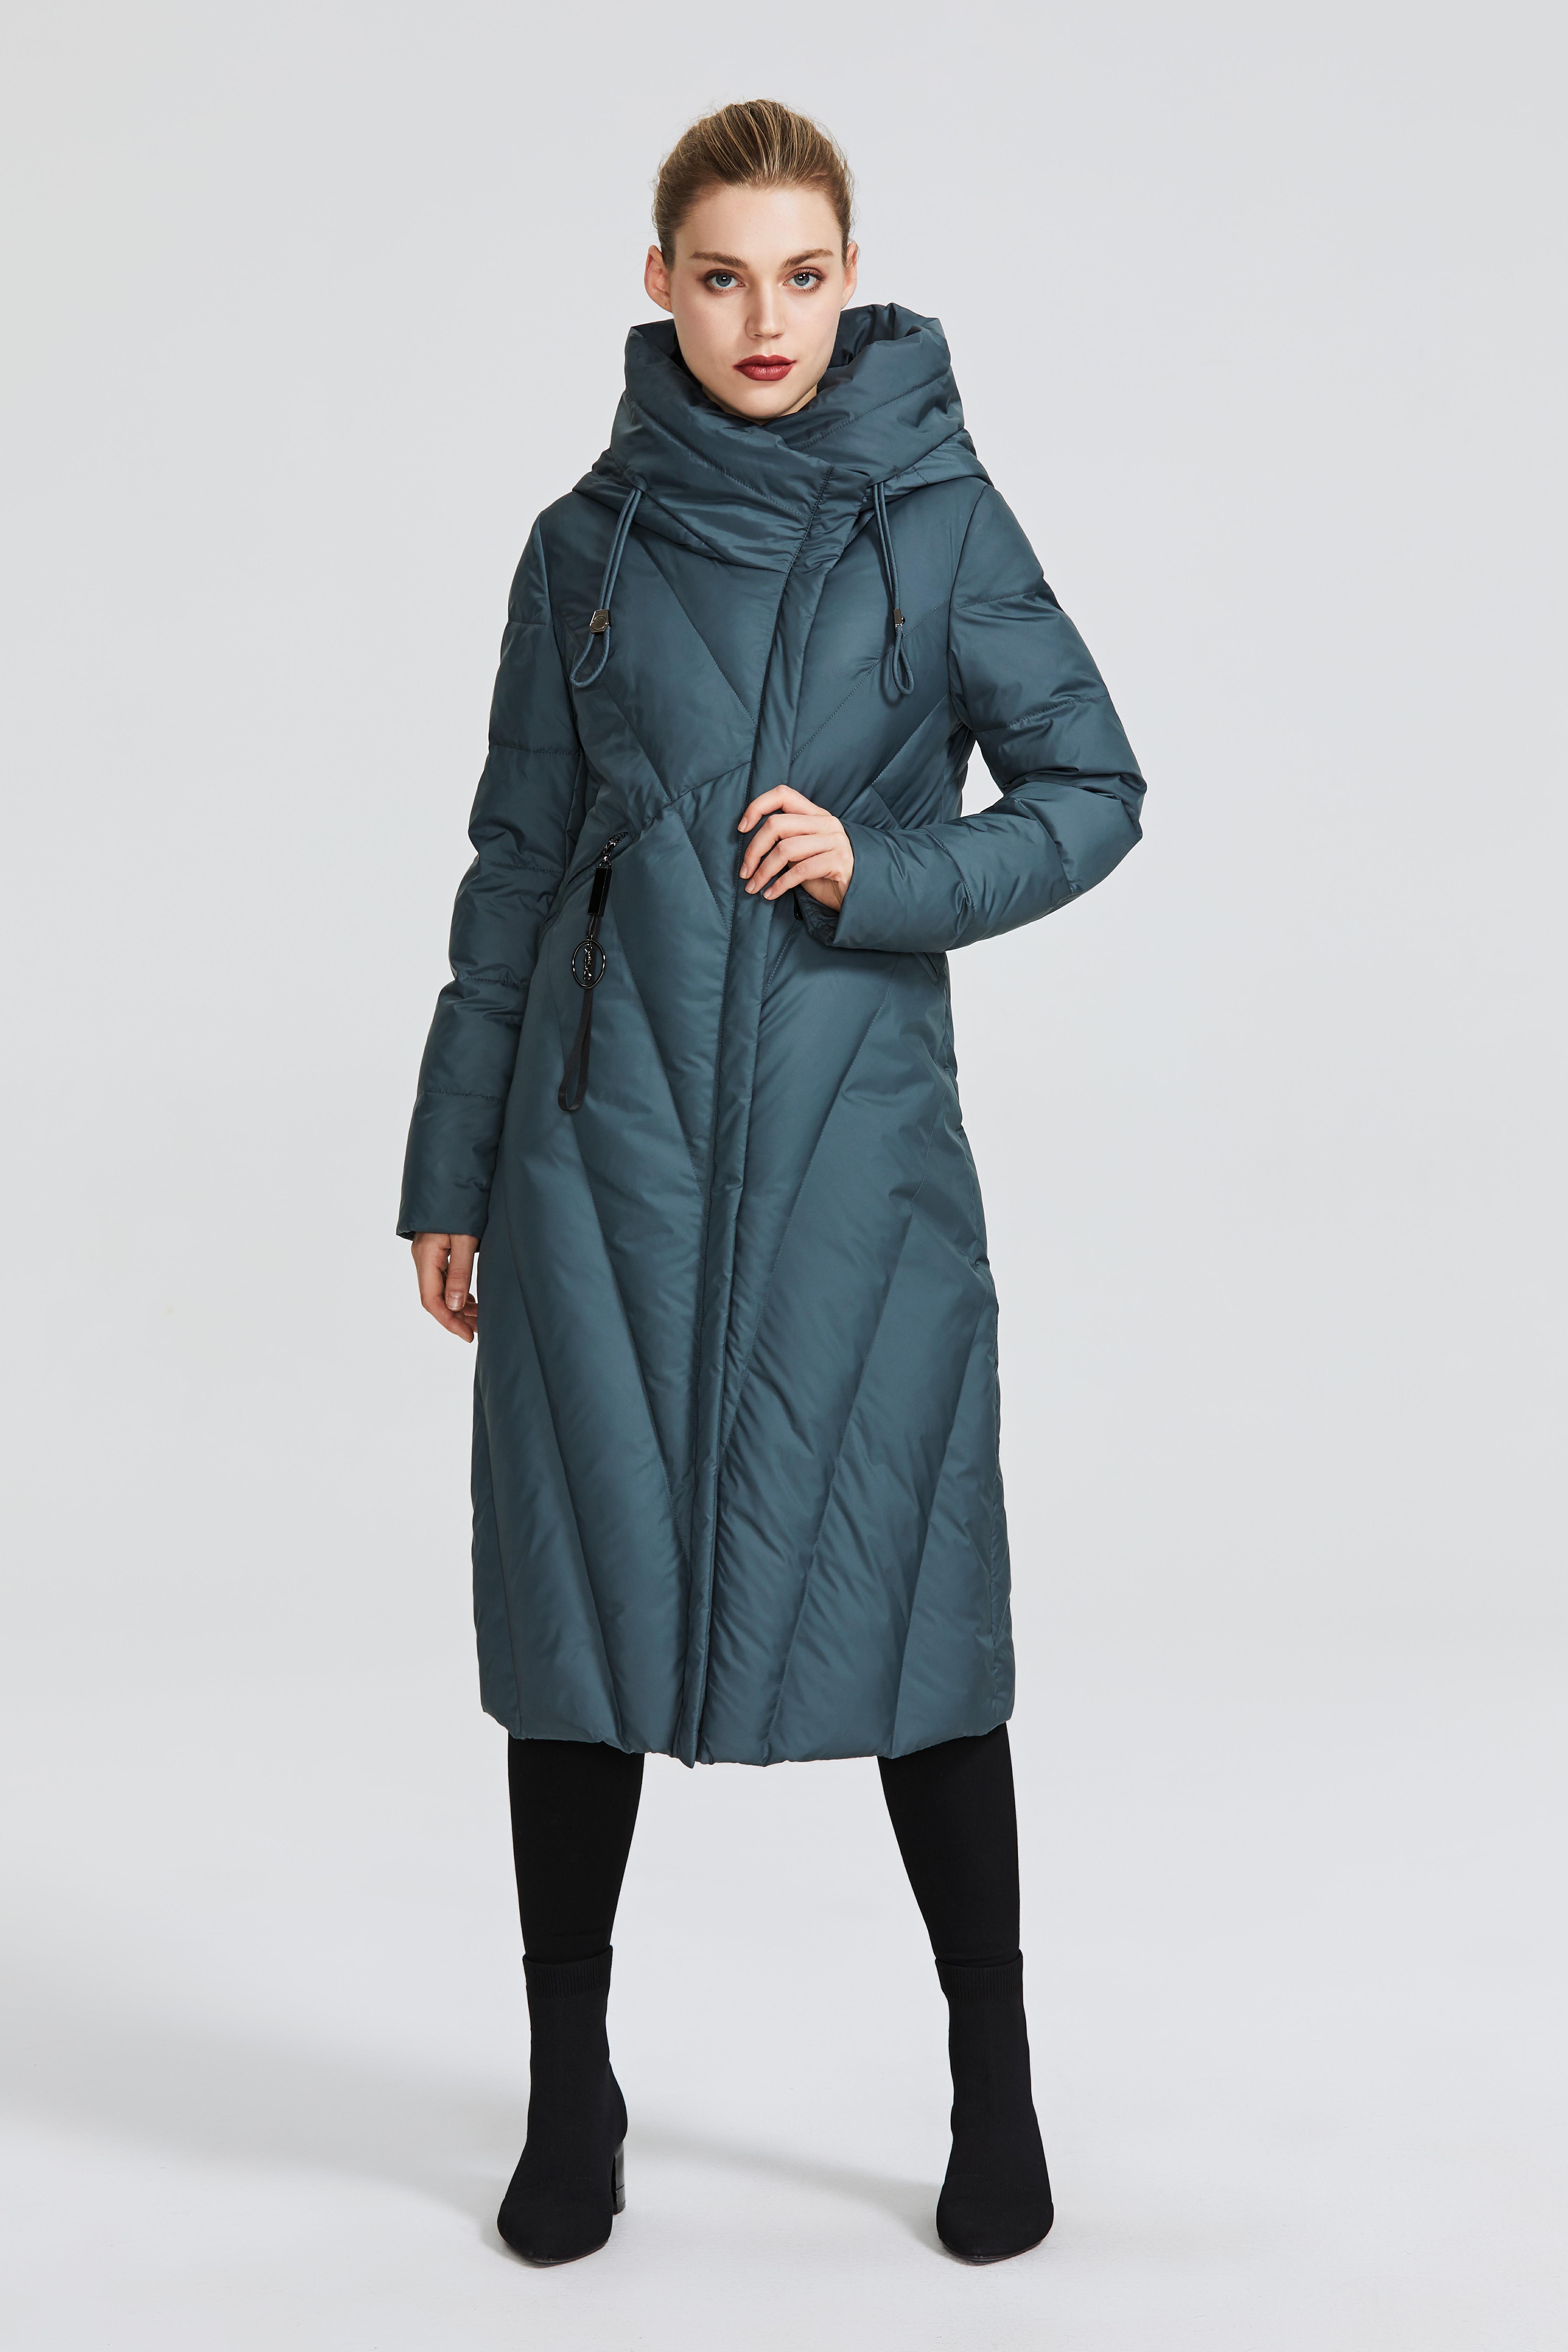 MIEGOFCE D99266 New Collection Women Coat With a Resistant  Windproof Collar Women Parka